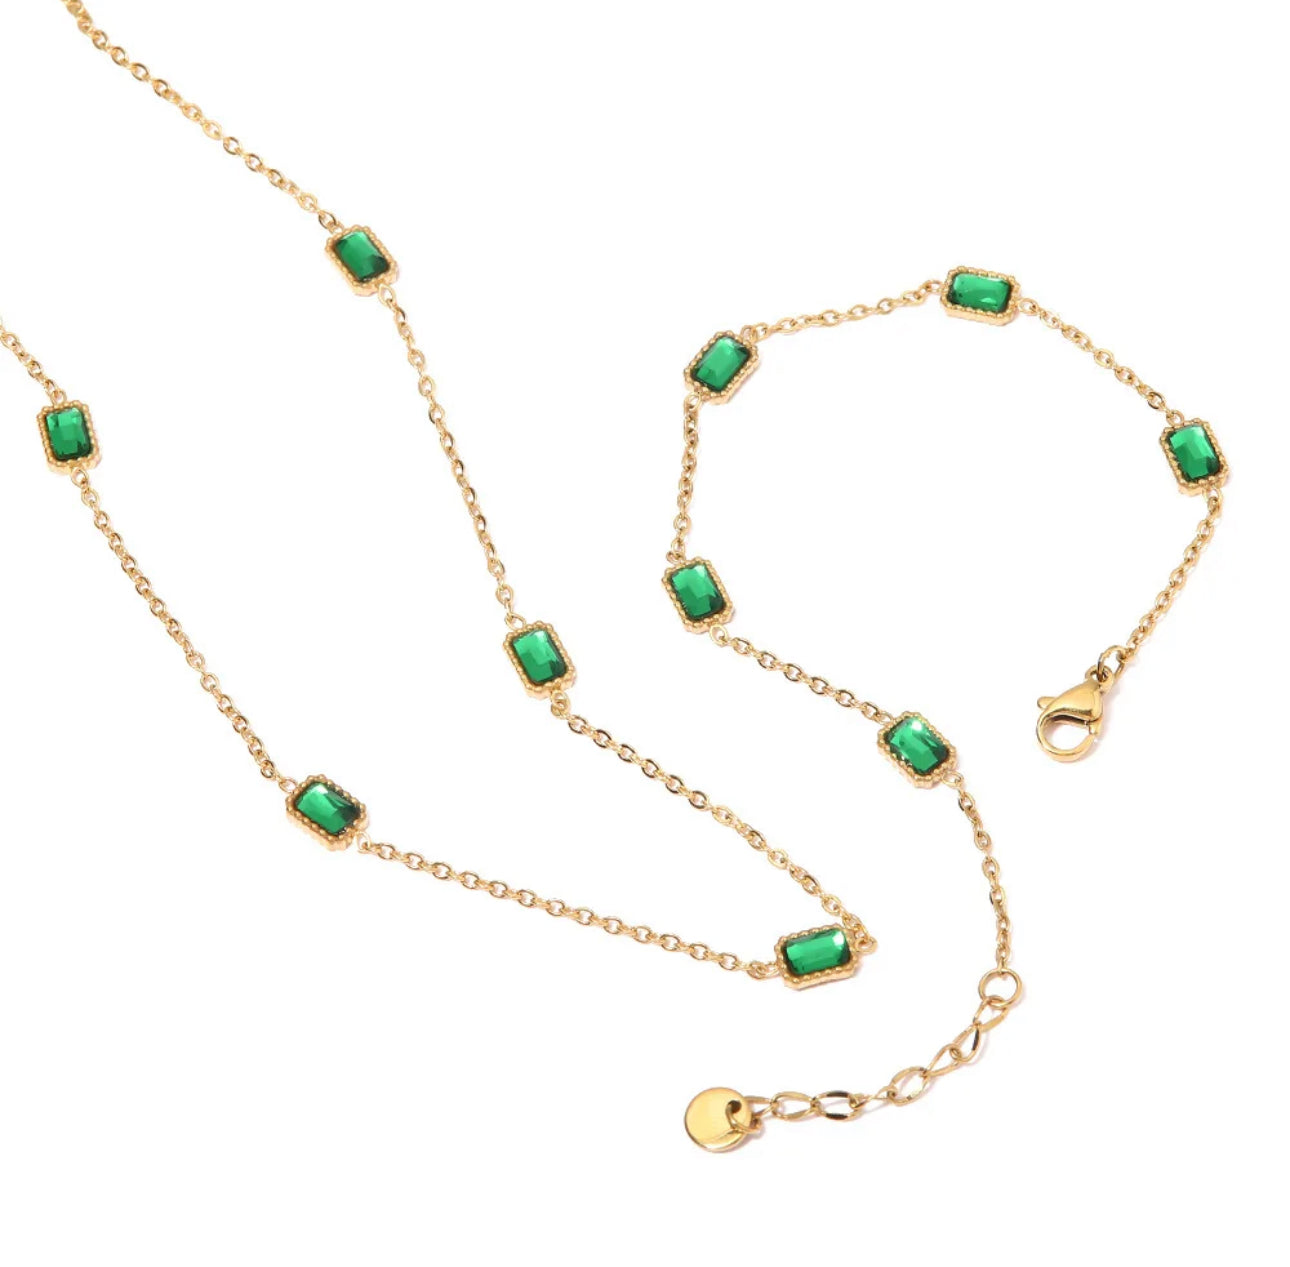 Emerald Essence Stainless Steel Necklace